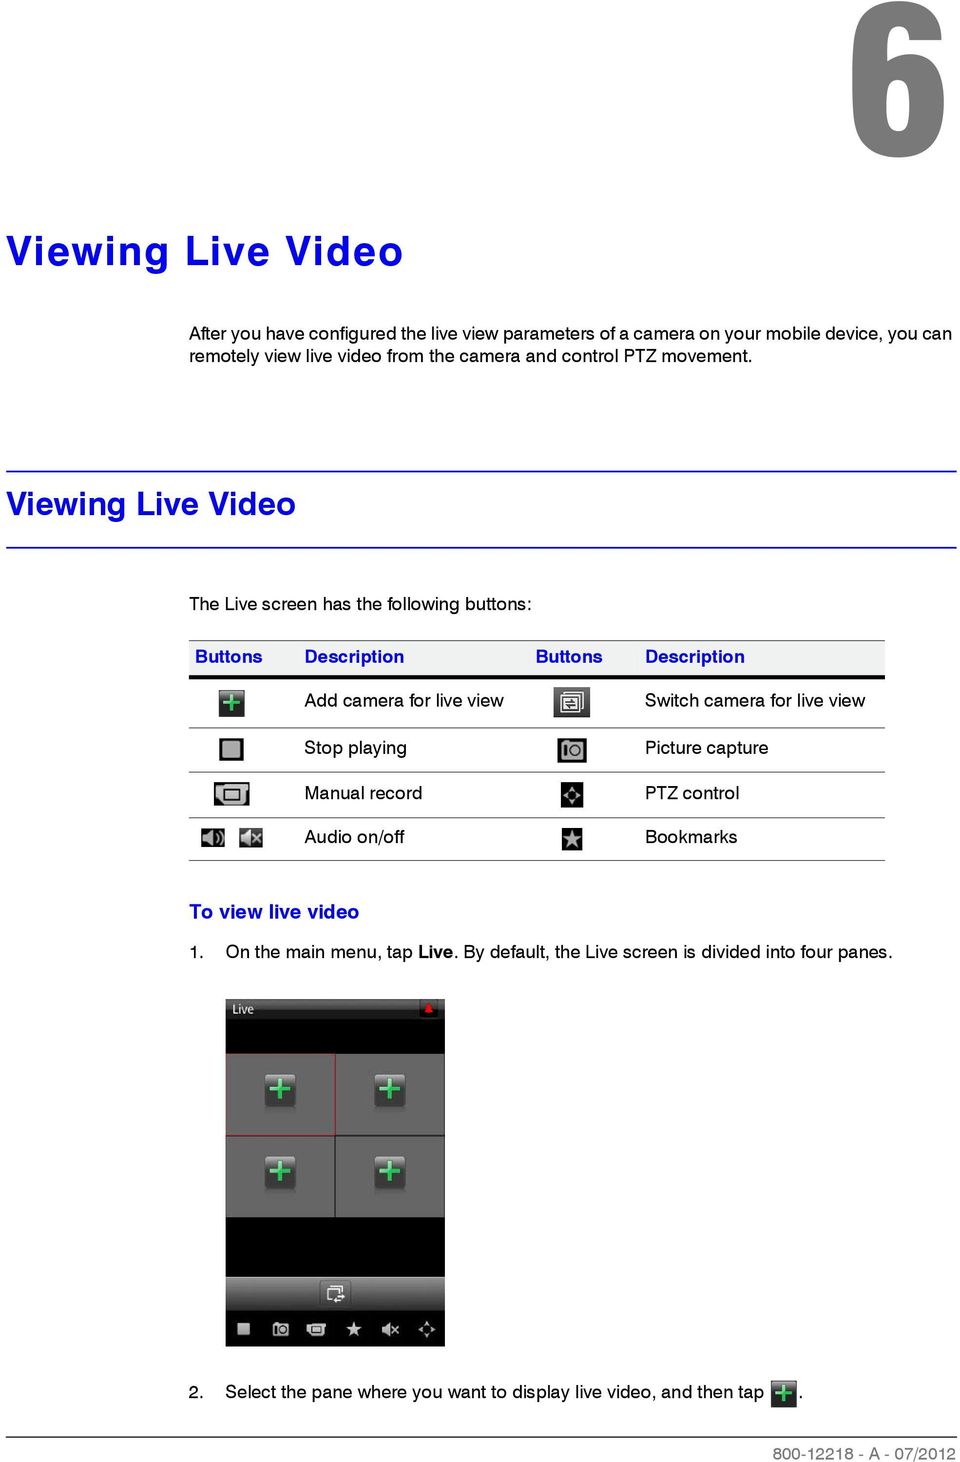 Viewing Live Video The Live screen has the following buttons: Buttons Description Buttons Description Add camera for live view Stop playing Manual